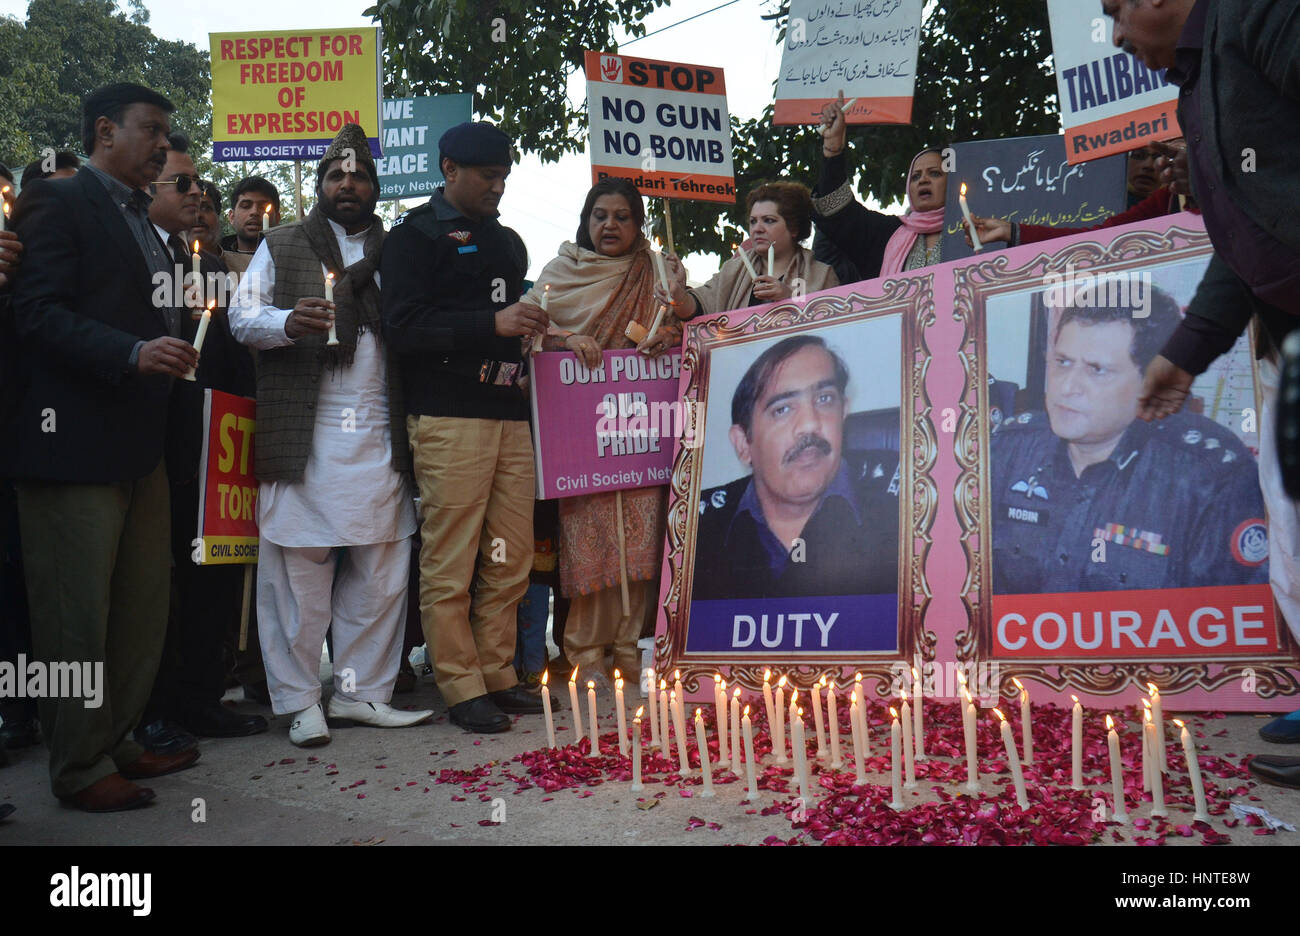 Pakistani members of civil society holding placards stage protest during demonstration against bomb blast. At least 19 people were killed and 90 others injured when a suicide bomber hit protestors outside provincial assembly in Pakistan's Punjab province on Monday evening. Four suicide bombers struck Pakistan in one day on February 15, 2017, killing six people and unnerving citizens whose growing sense of security has been shaken by multiple Taliban blasts this week. The latest assault happened in the northwestern city of Peshawar, said police, after a bomber rode a motorcycle into a van carry Stock Photo